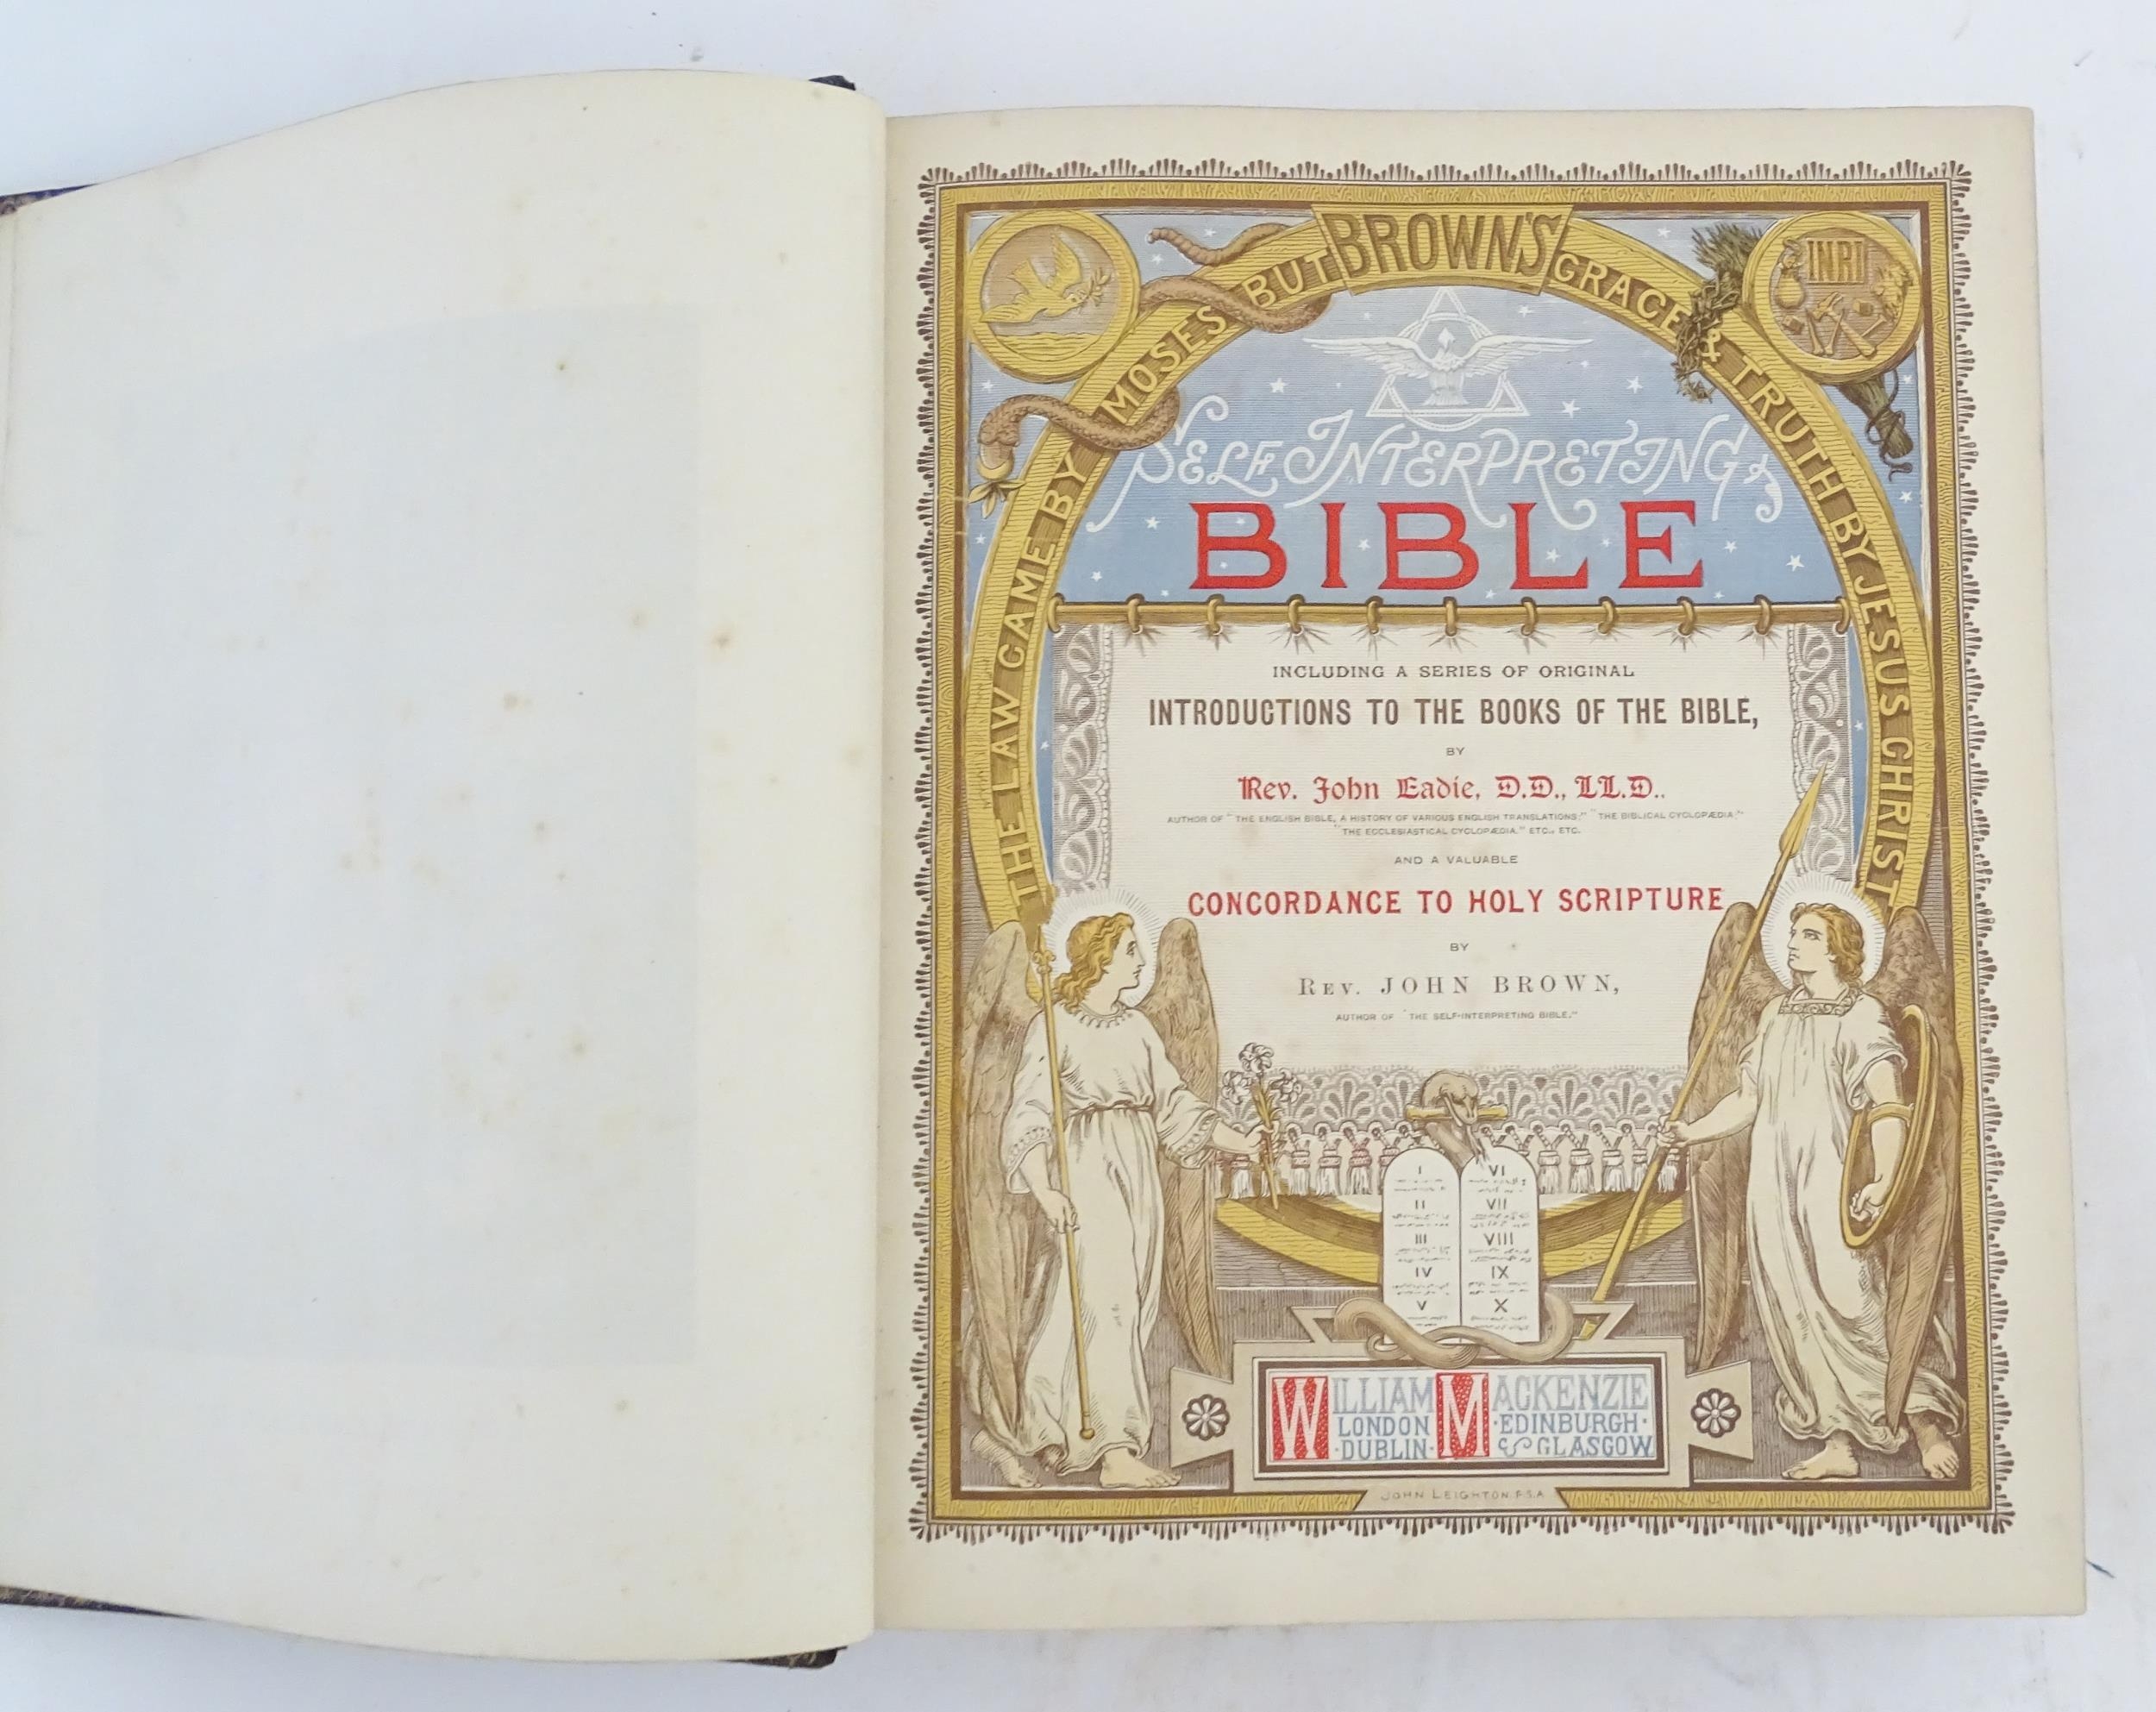 Book: The Self-Interpreting Bible containing the Old and New Testaments, by the Rev John Eadie. - Image 5 of 6